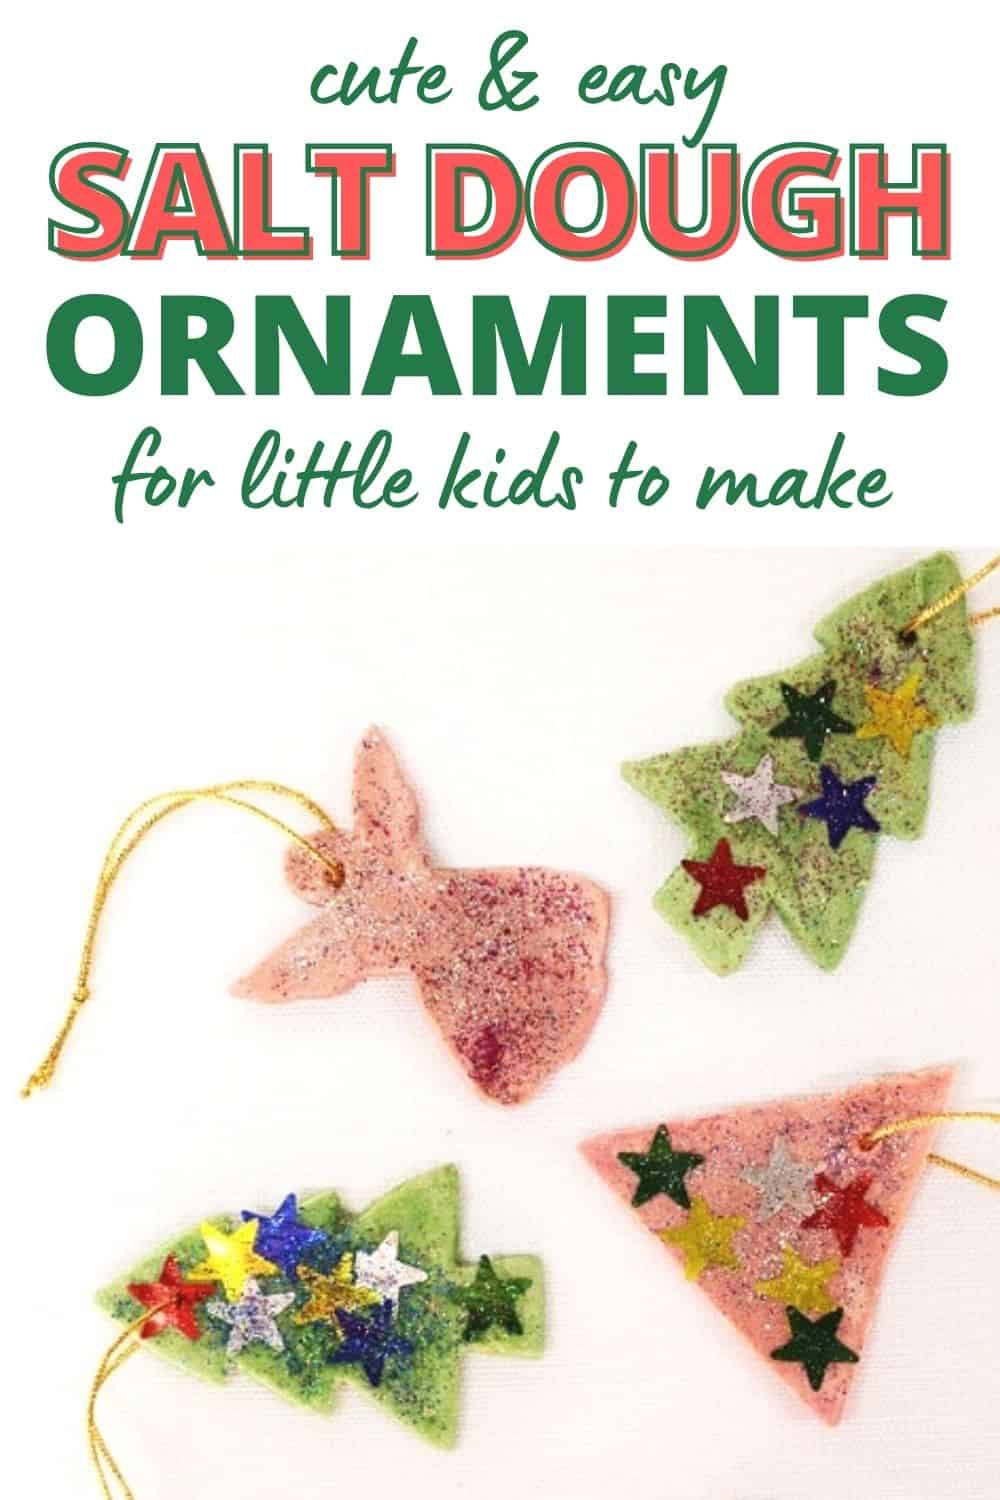 short Salt dough ornaments craft for kids and toddlers